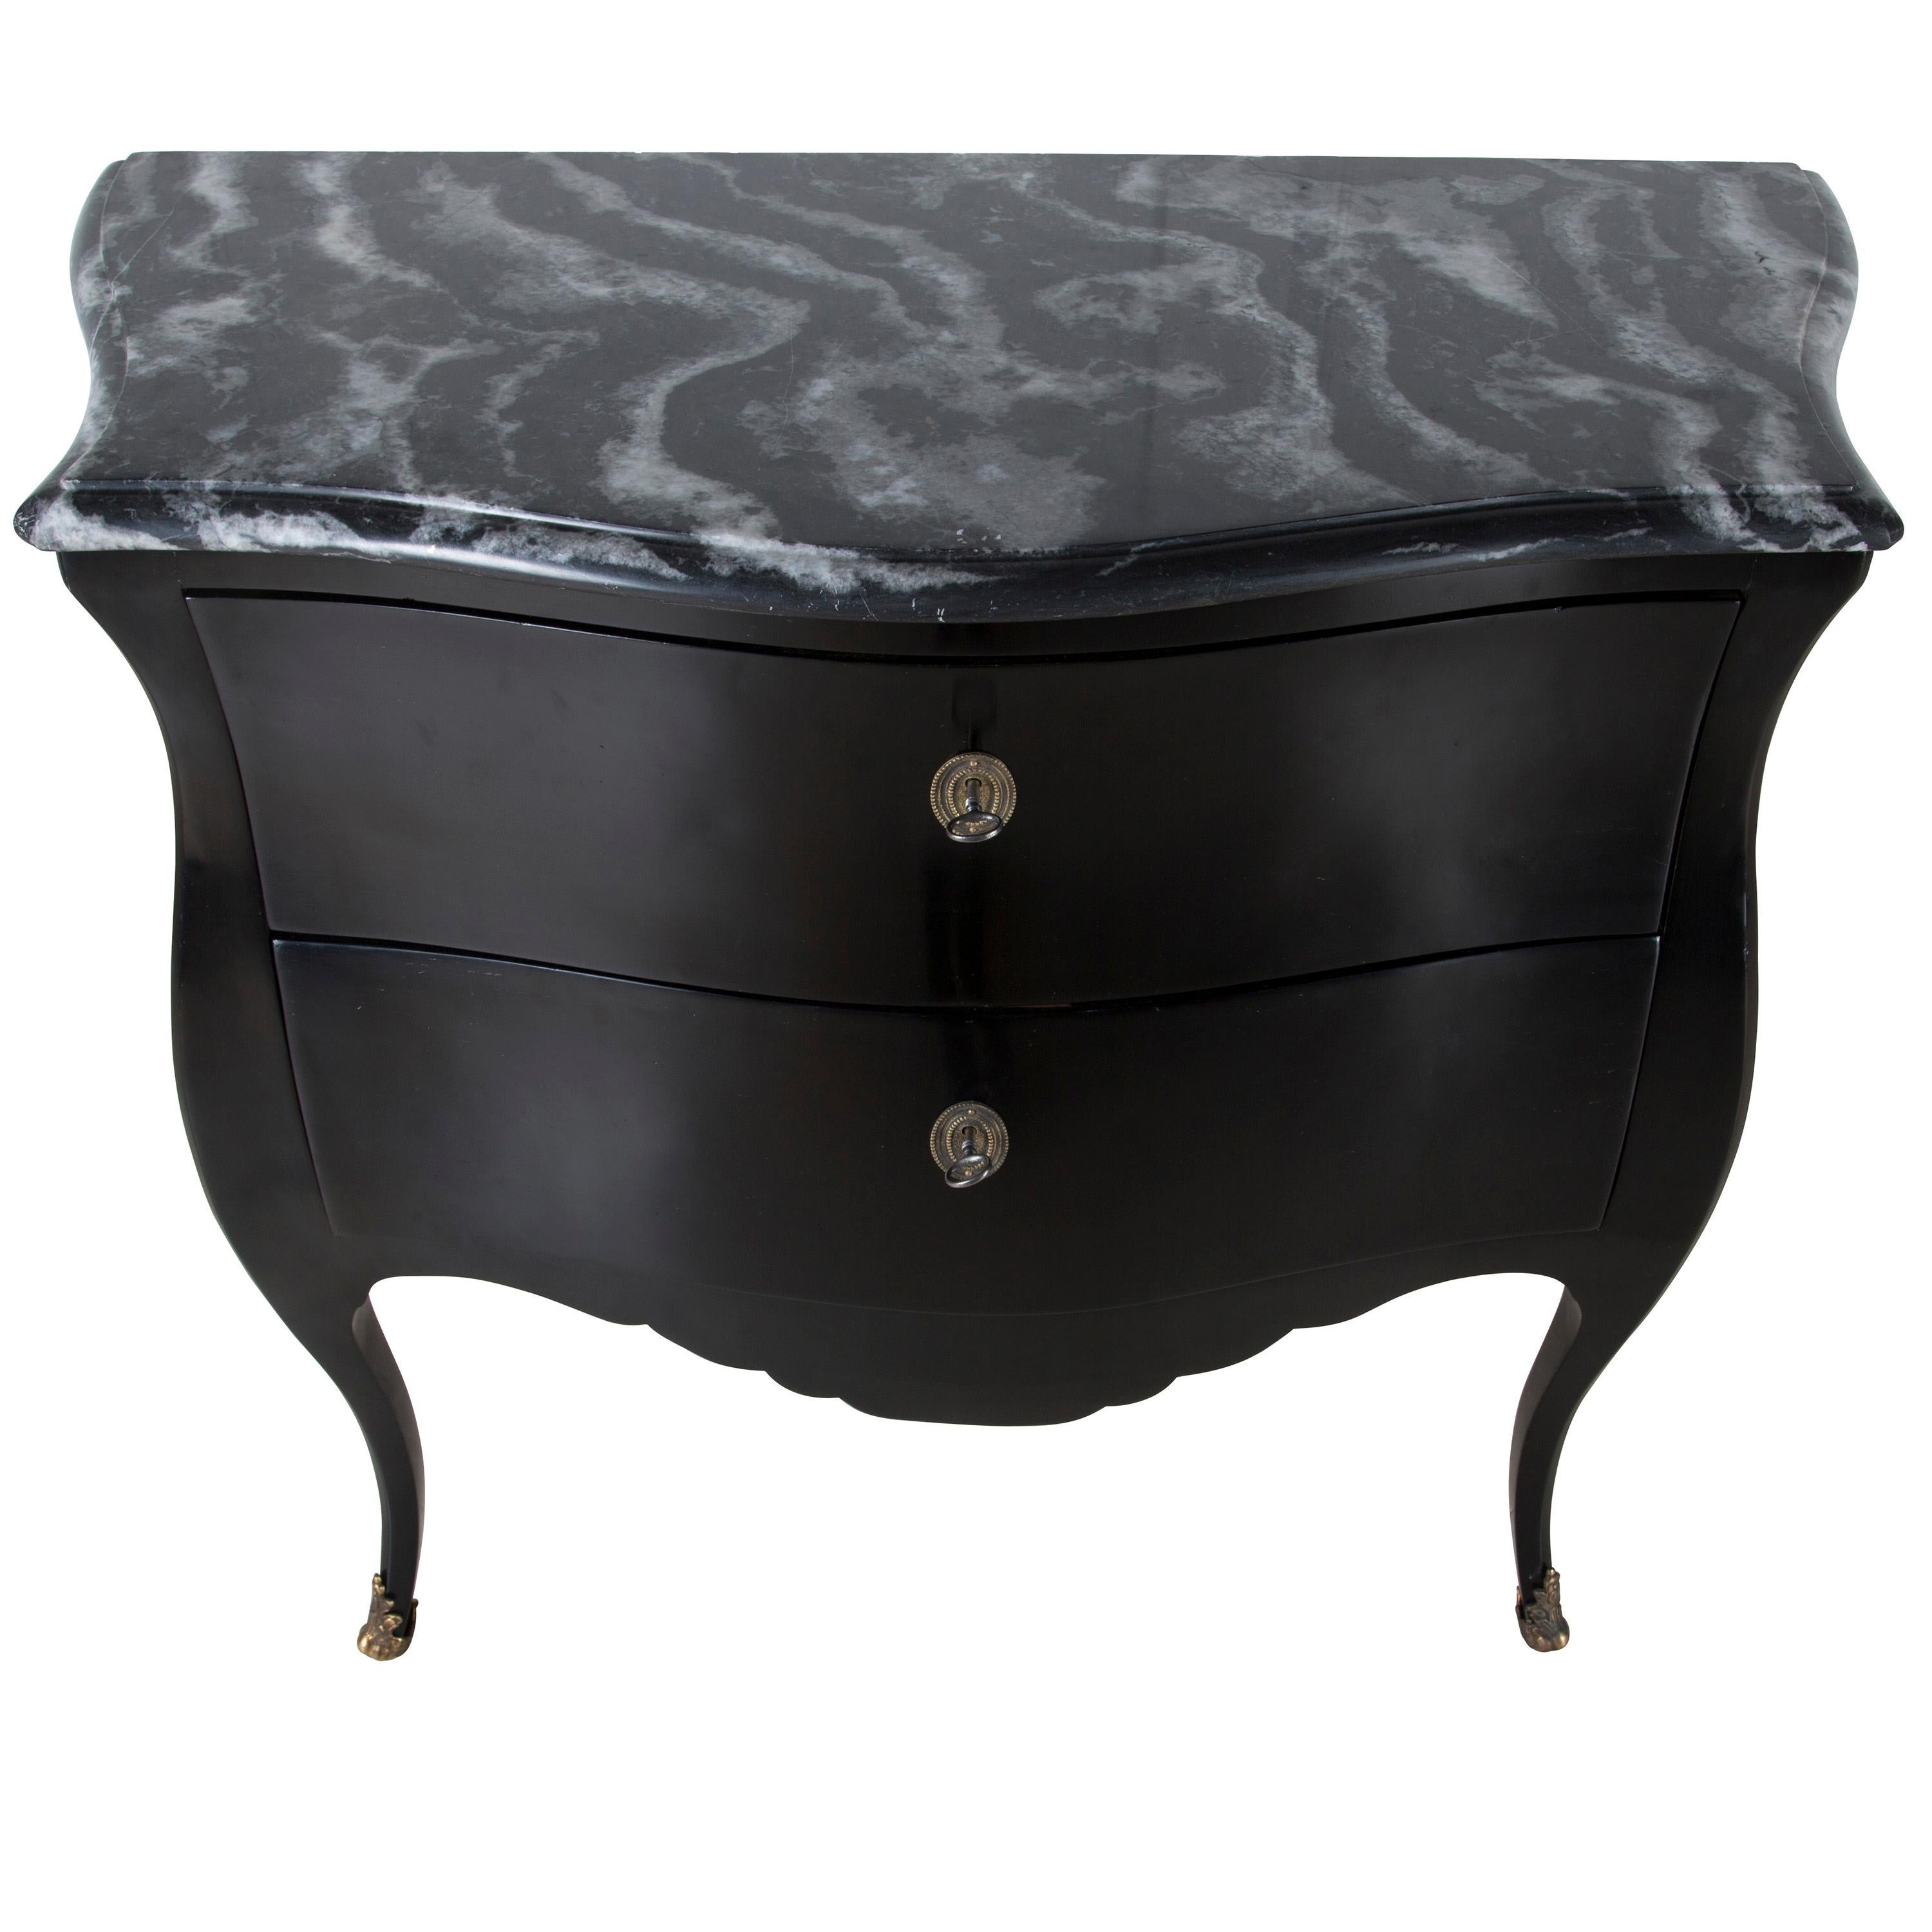 A strikingly simple and shapely 19th century French bombe commode with stunning black and white marble top. Later ebonized, circa 1880.